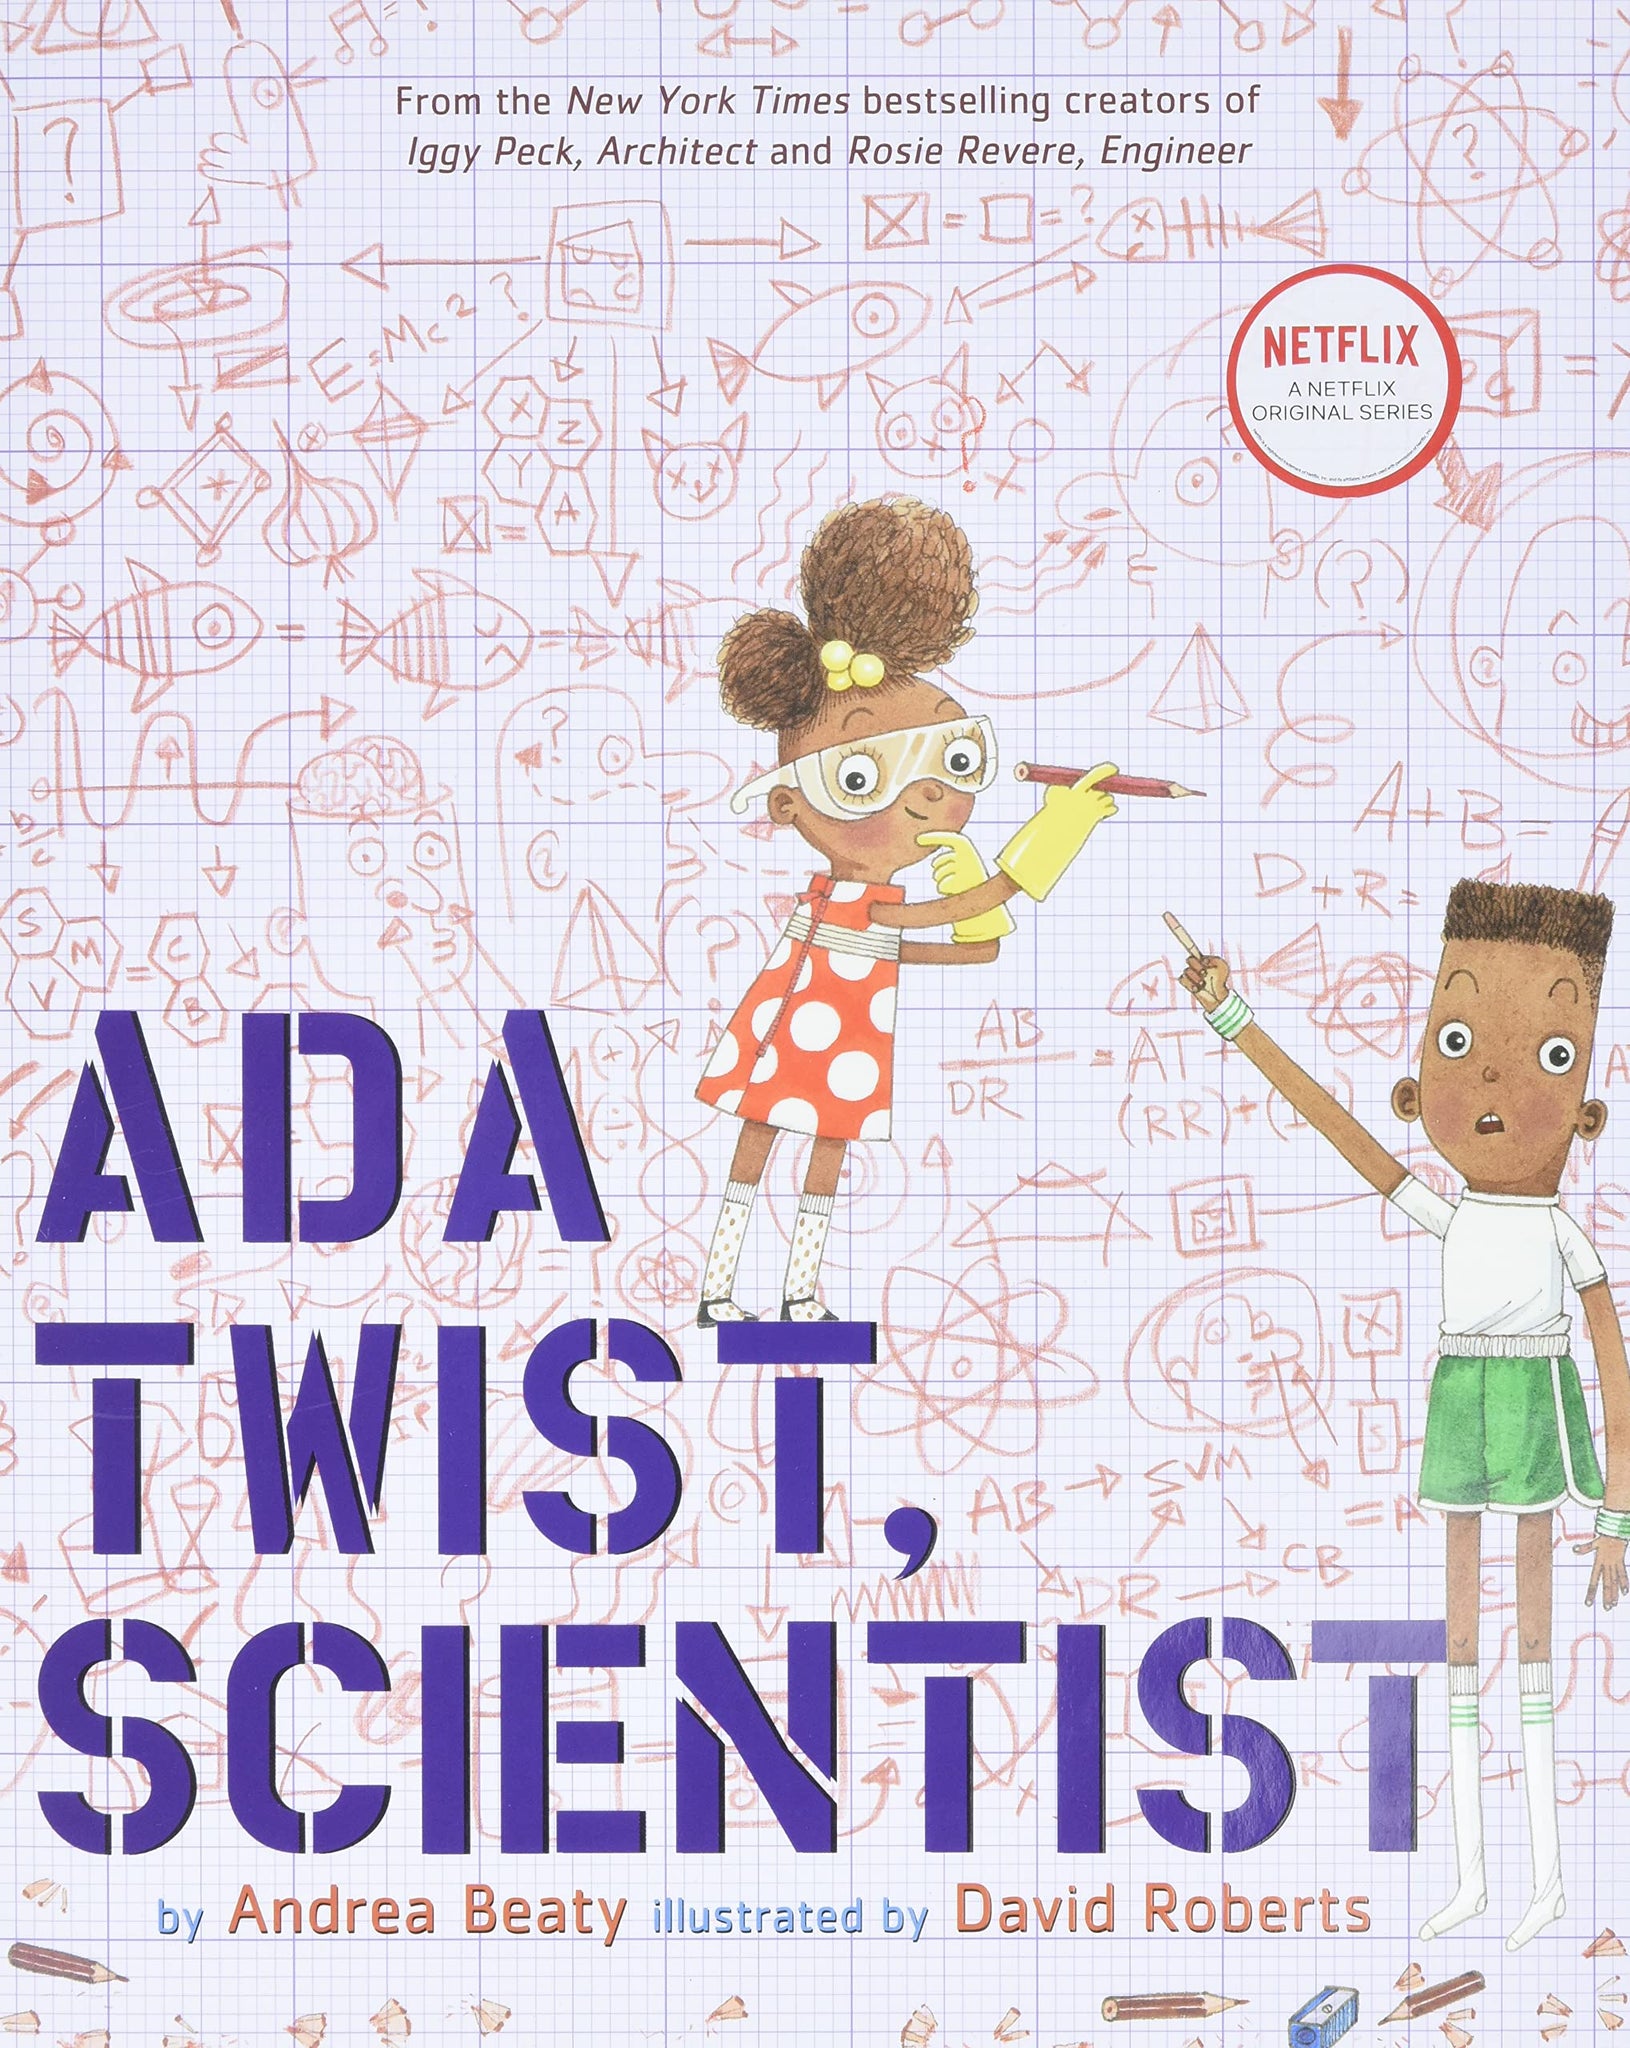 Inspired by real-life makers Ada Lovelace and Marie Curie, this beloved #1 bestseller champions STEM, girl power and women scientists in a rollicking celebration of curiosity, the power perseverance, and the importance of asking “Why?”